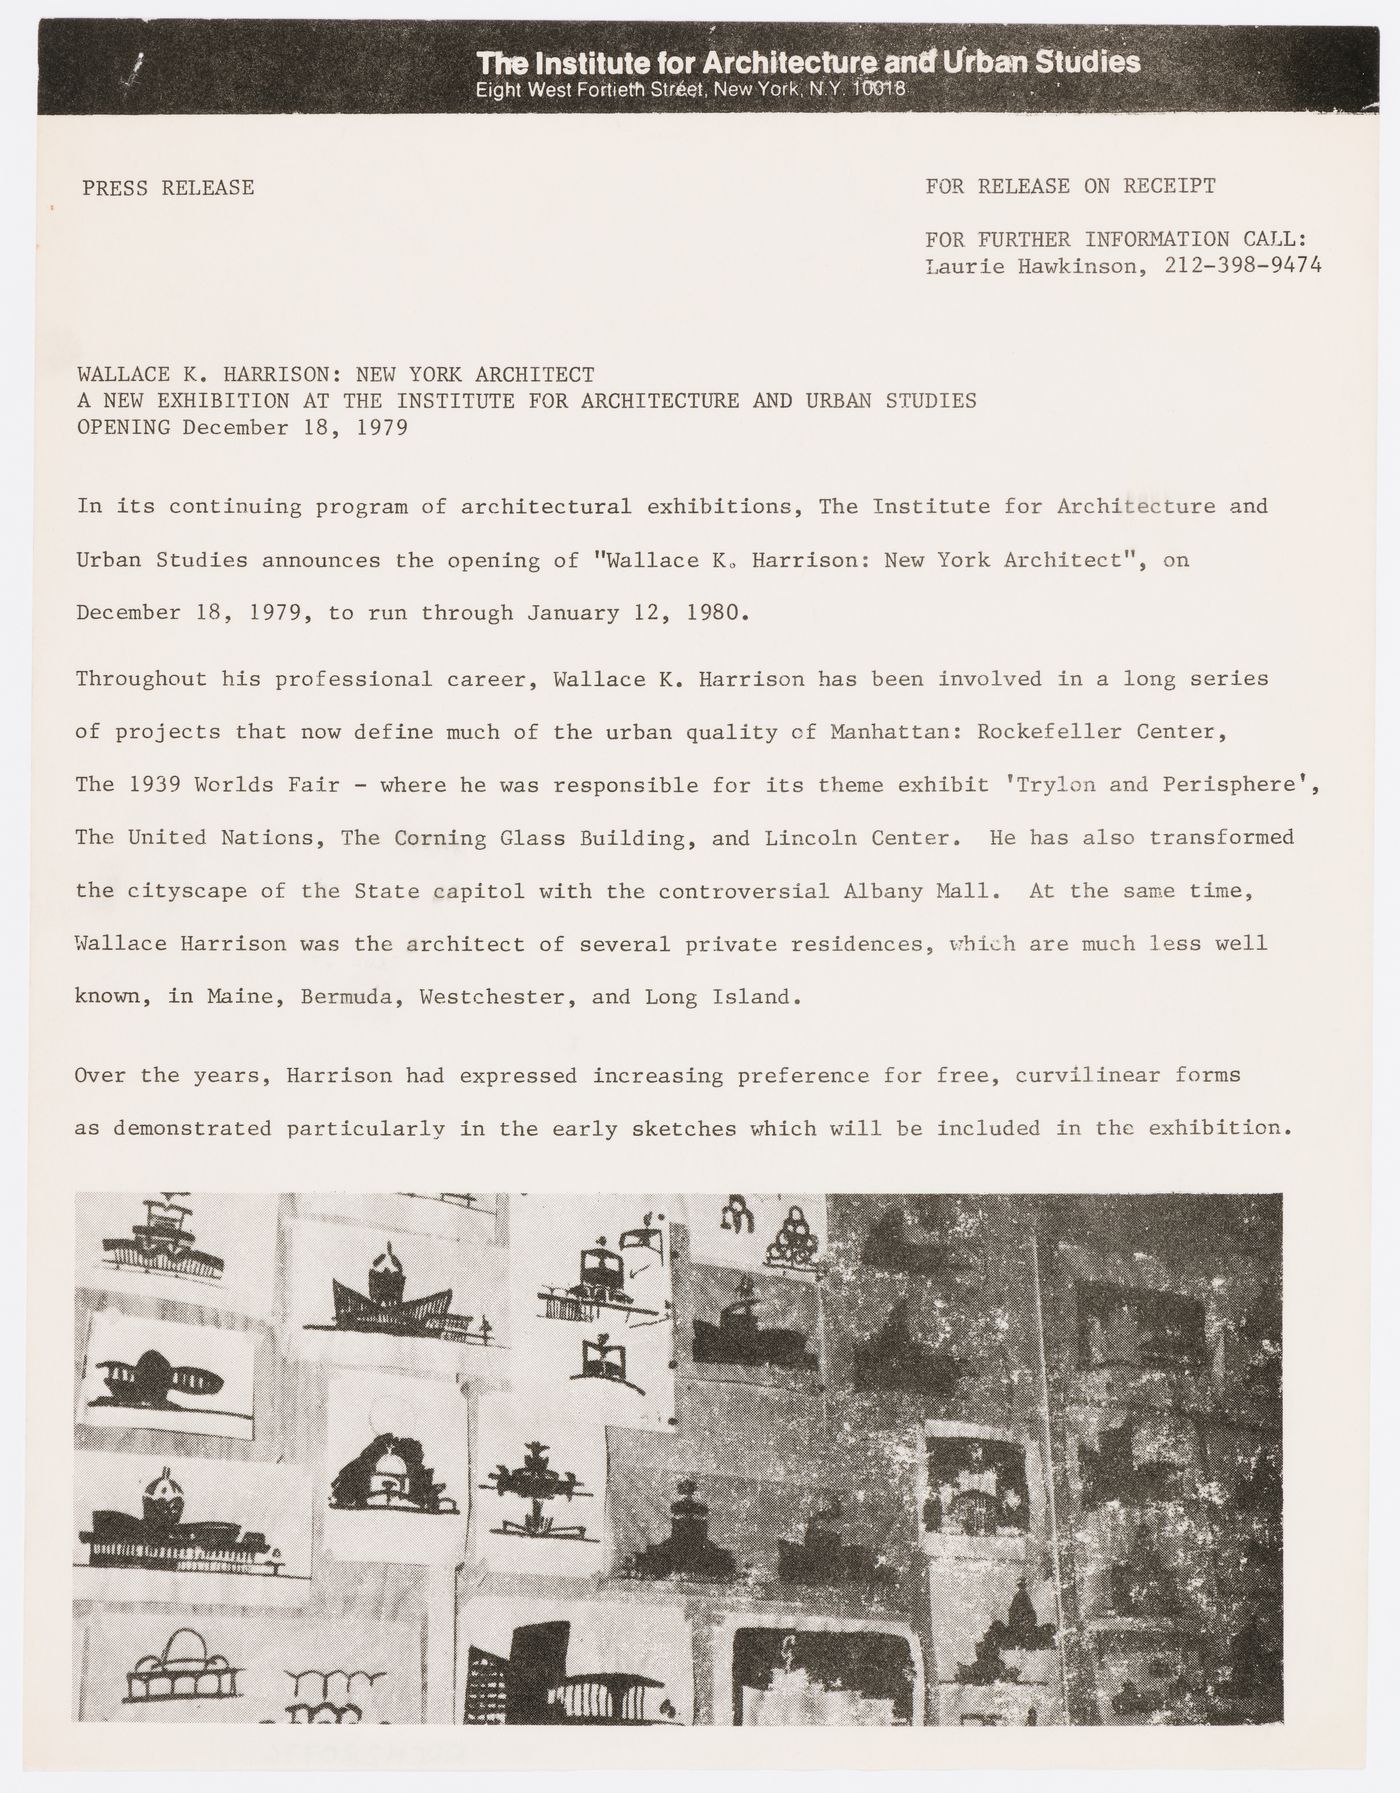 Press release for "Wallace K. Harrison: New York Architect" exhibition at the Institute for Architecture and Urban Studies